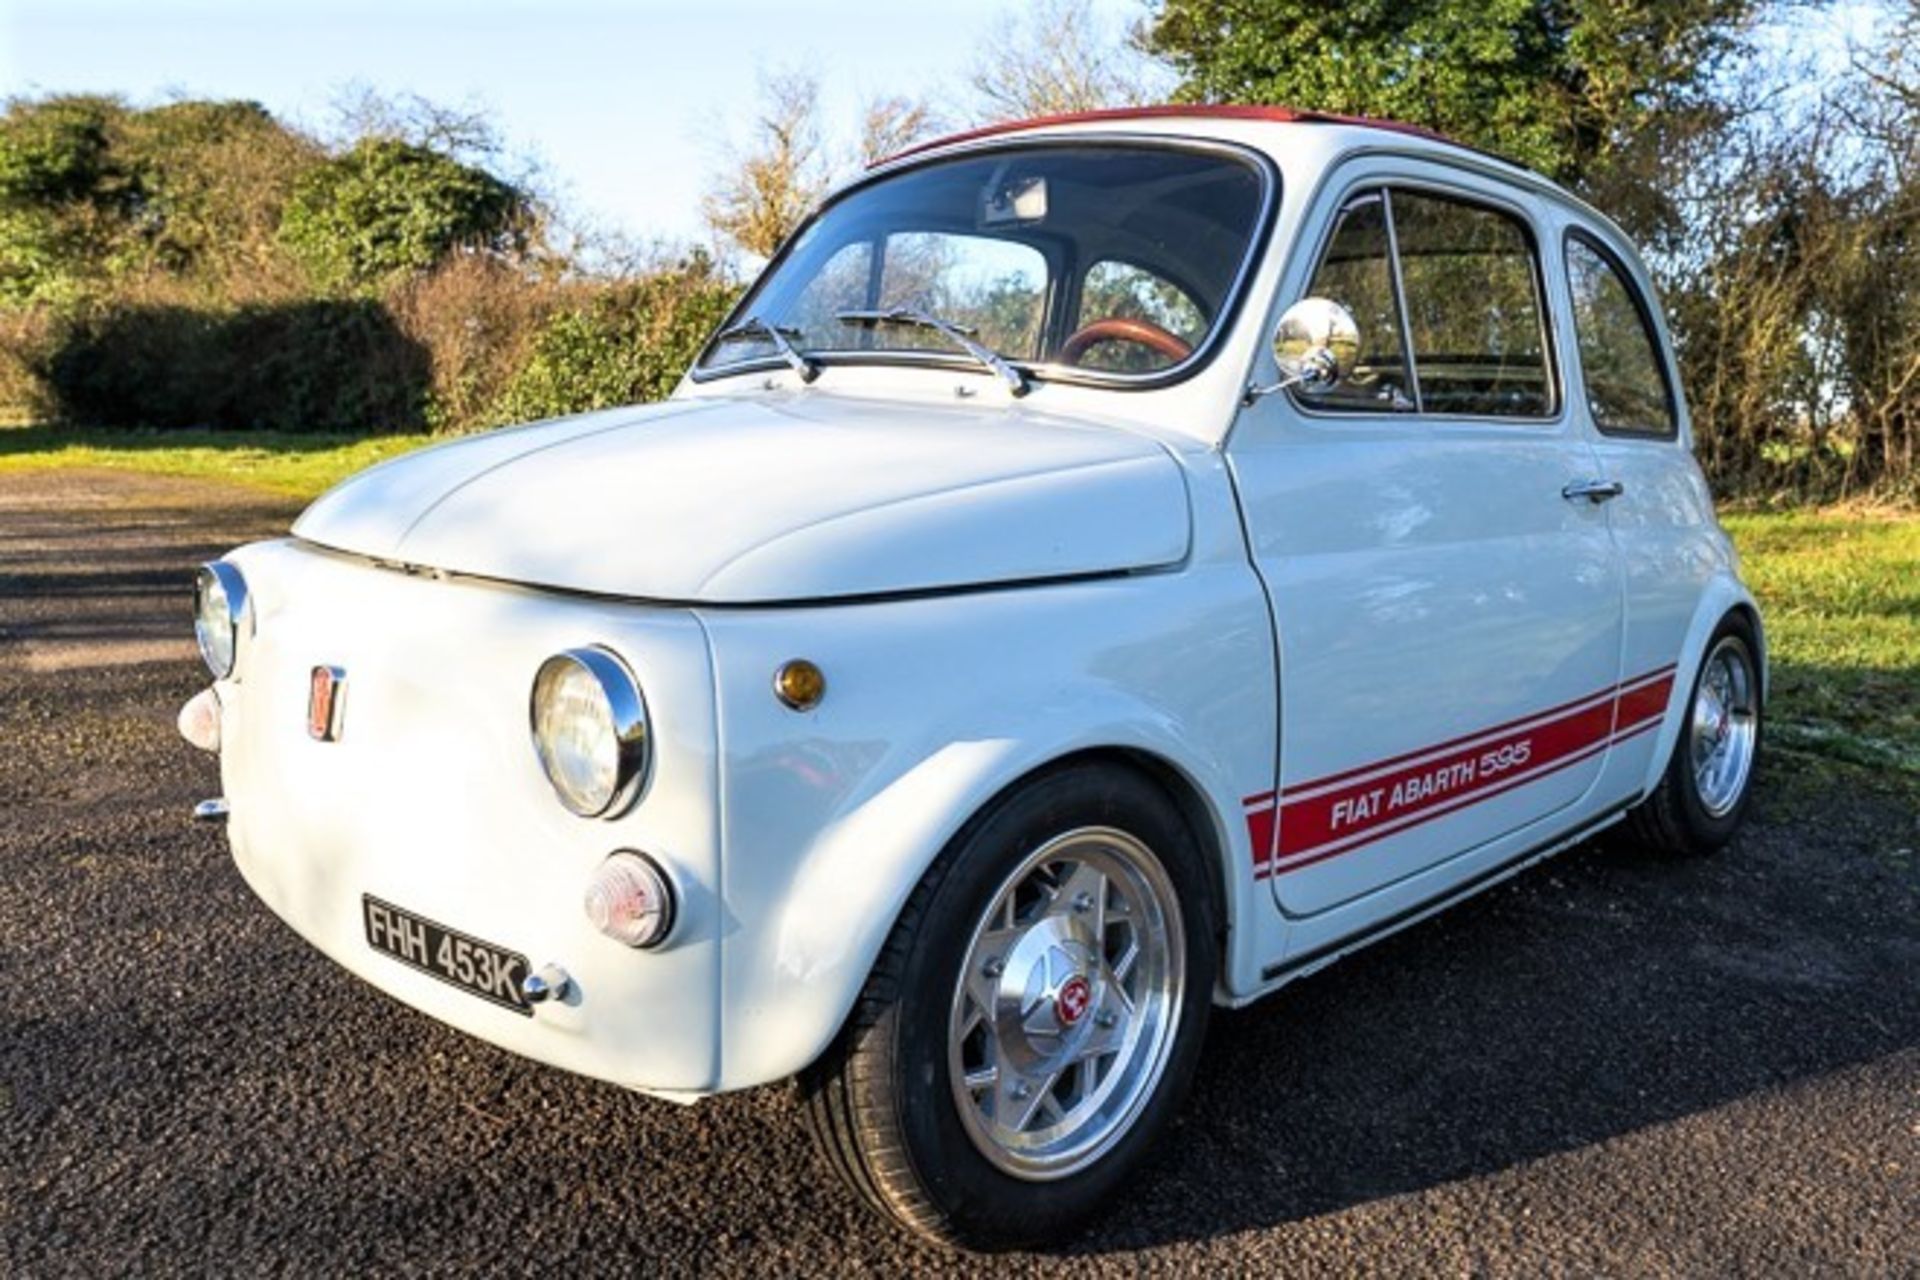 1972 FIAT 500 ABARTH TRIBUTE Registration Number: FHH 453K             Chassis Number: TBA